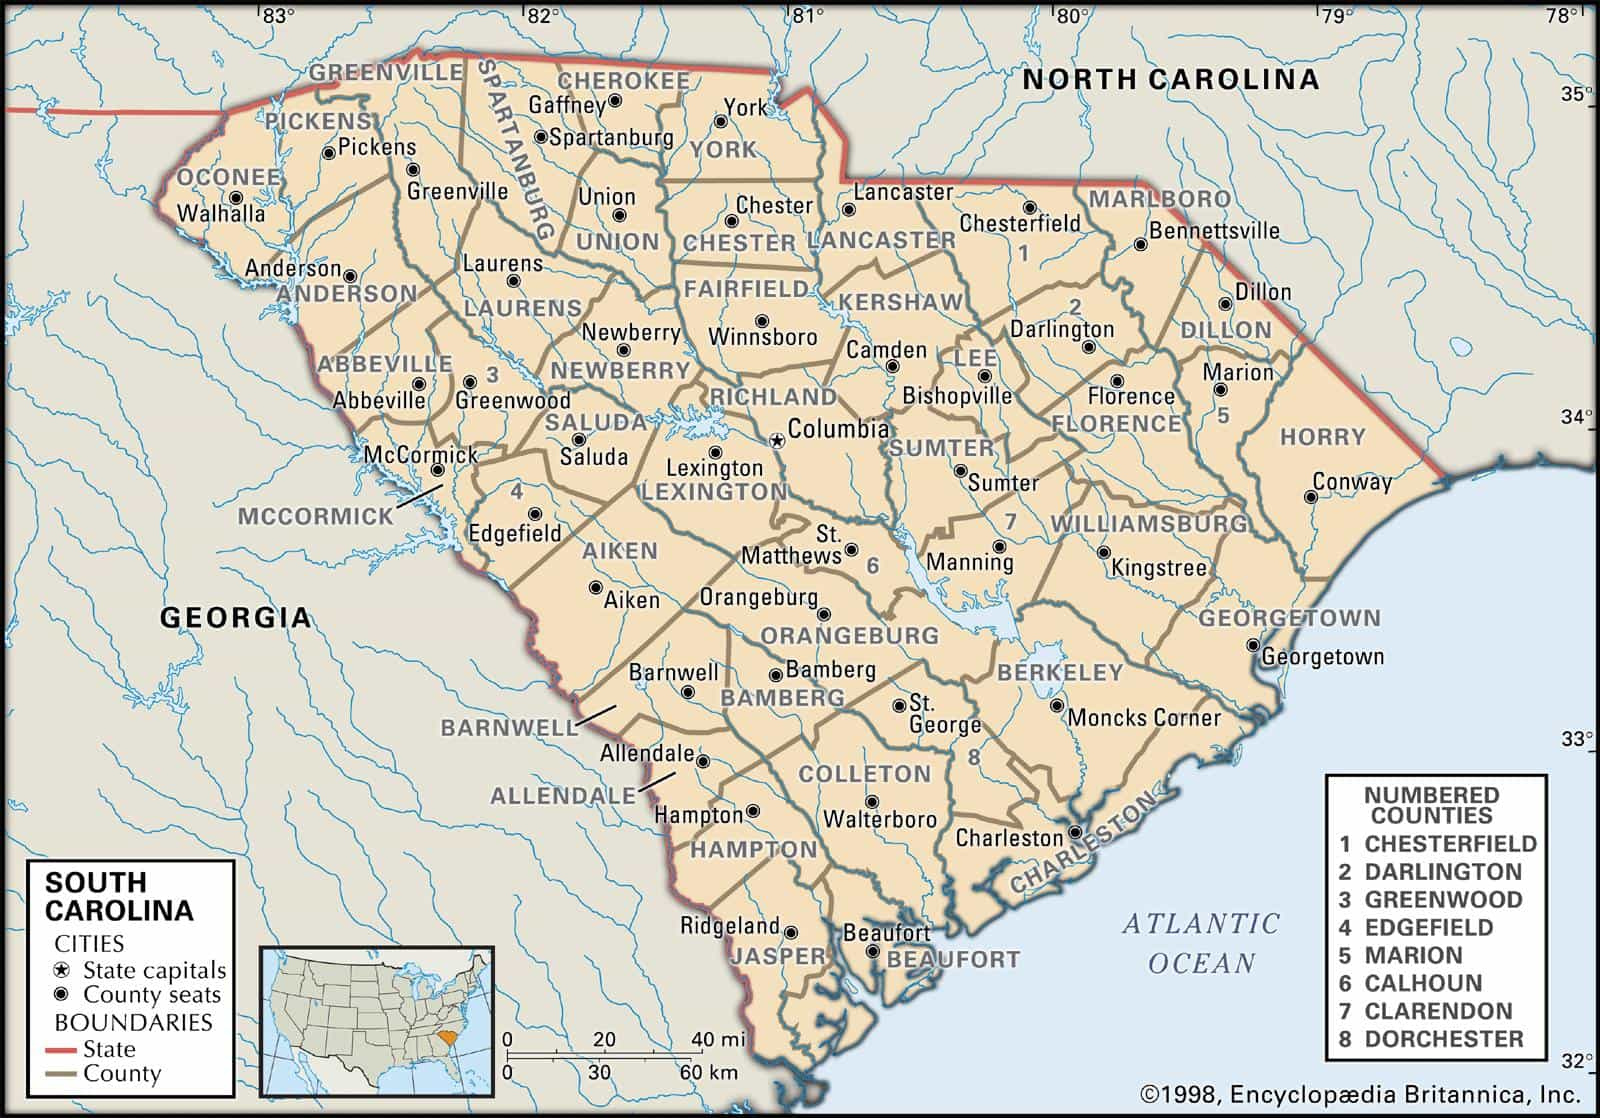 Historical Facts Of South Carolina Counties